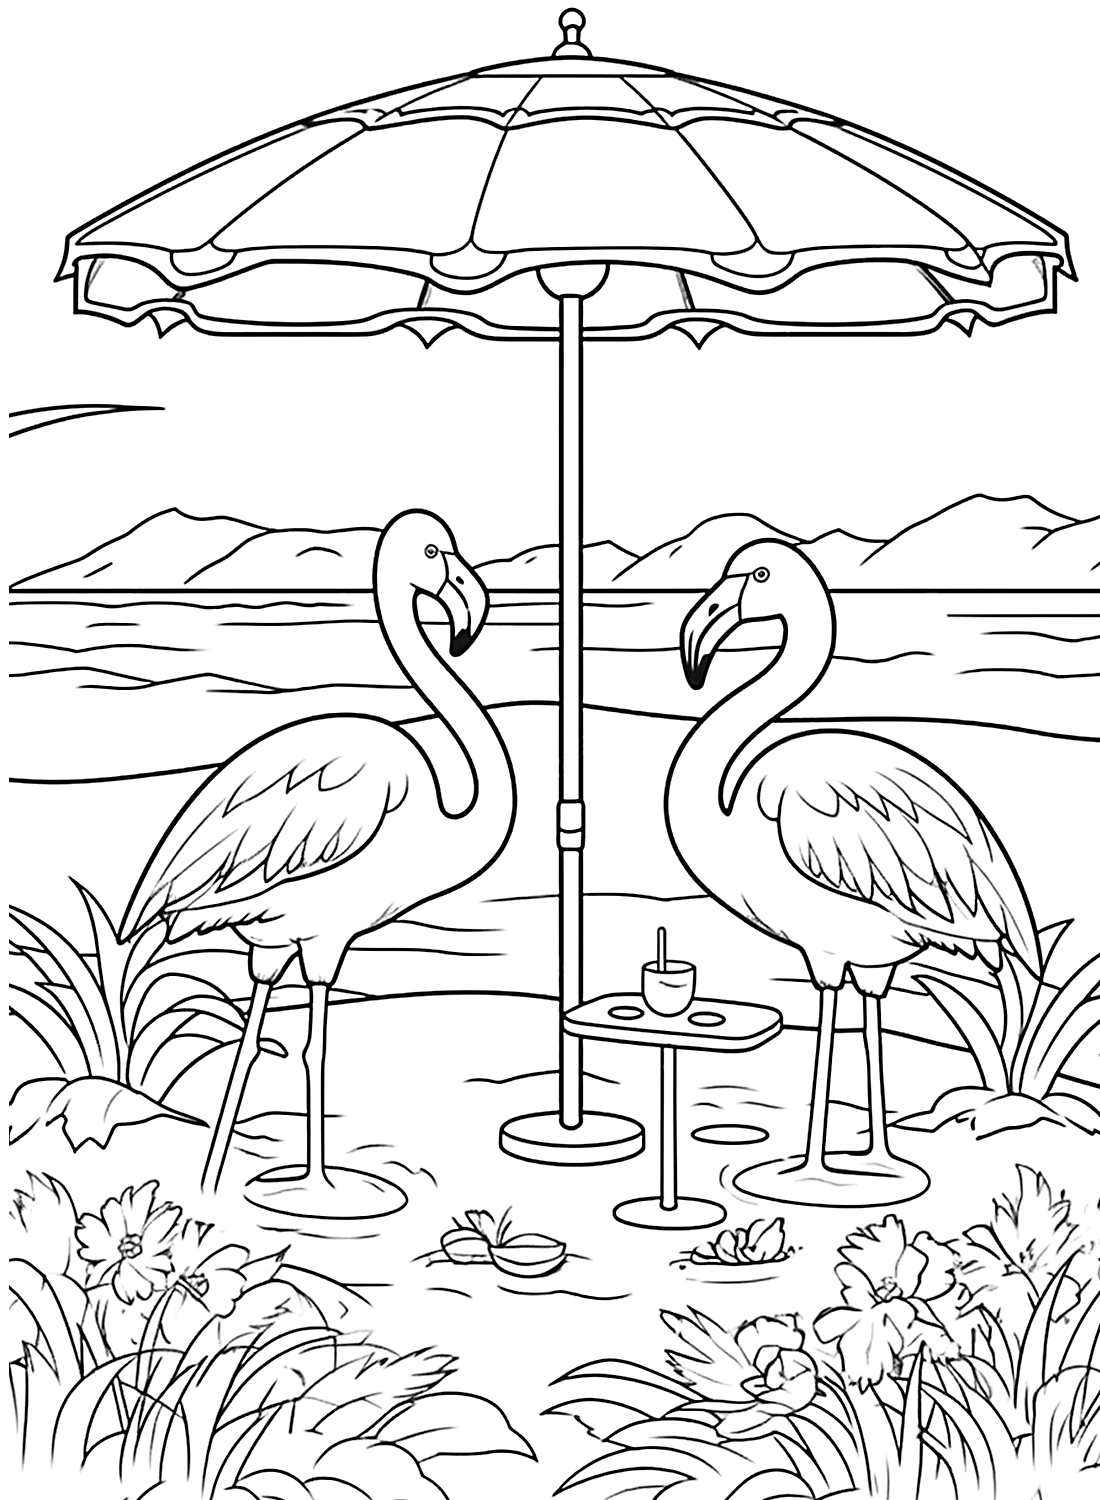 Coloring Page of Flamingo and Beach